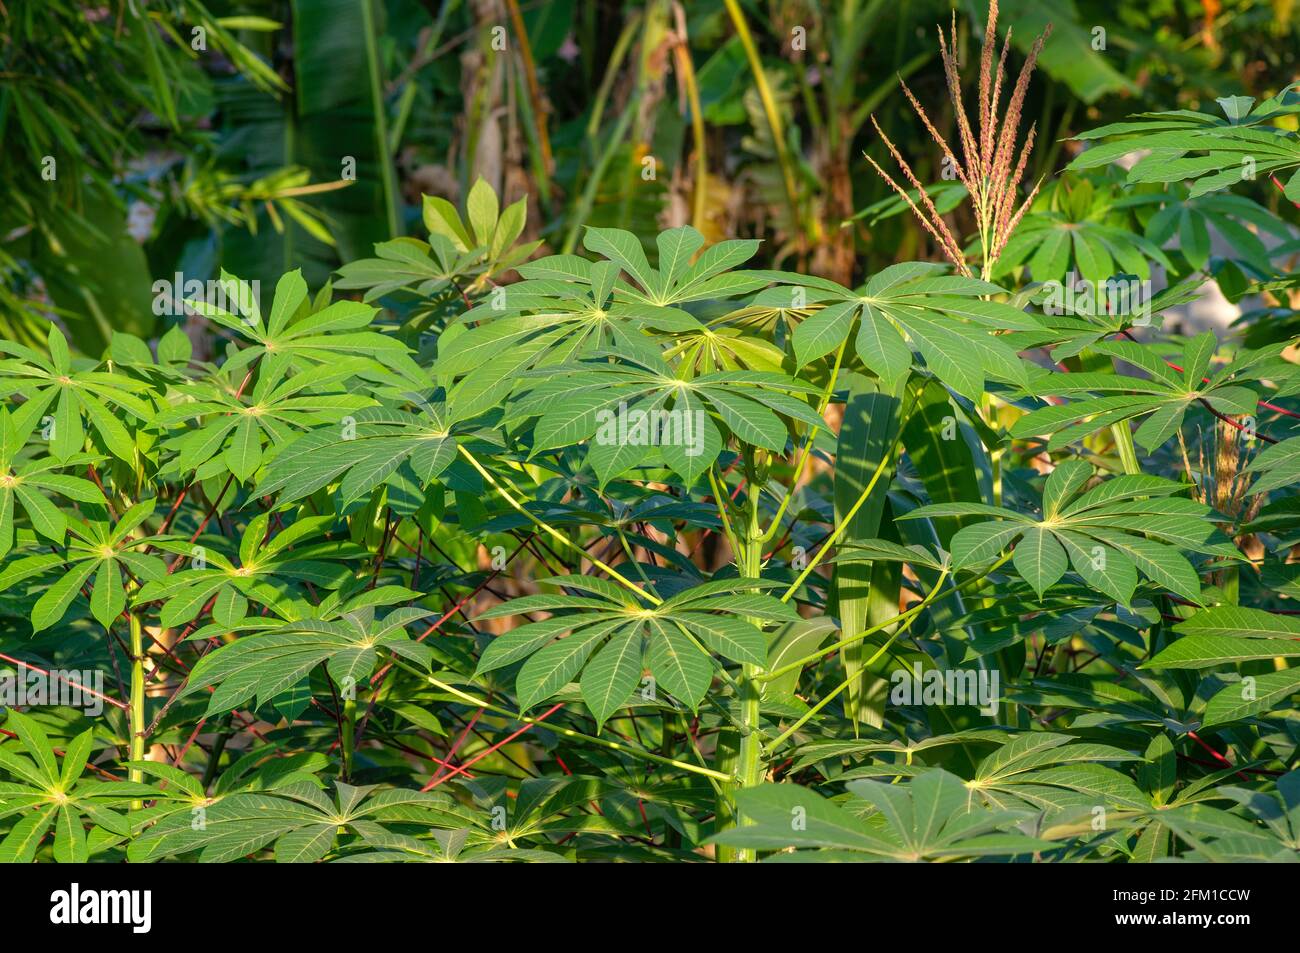 Green cassava leaves (Manihot esculenta), commonly called cassava manioc, or yuca, in shallow focus. It can be used for vegetables. Stock Photo